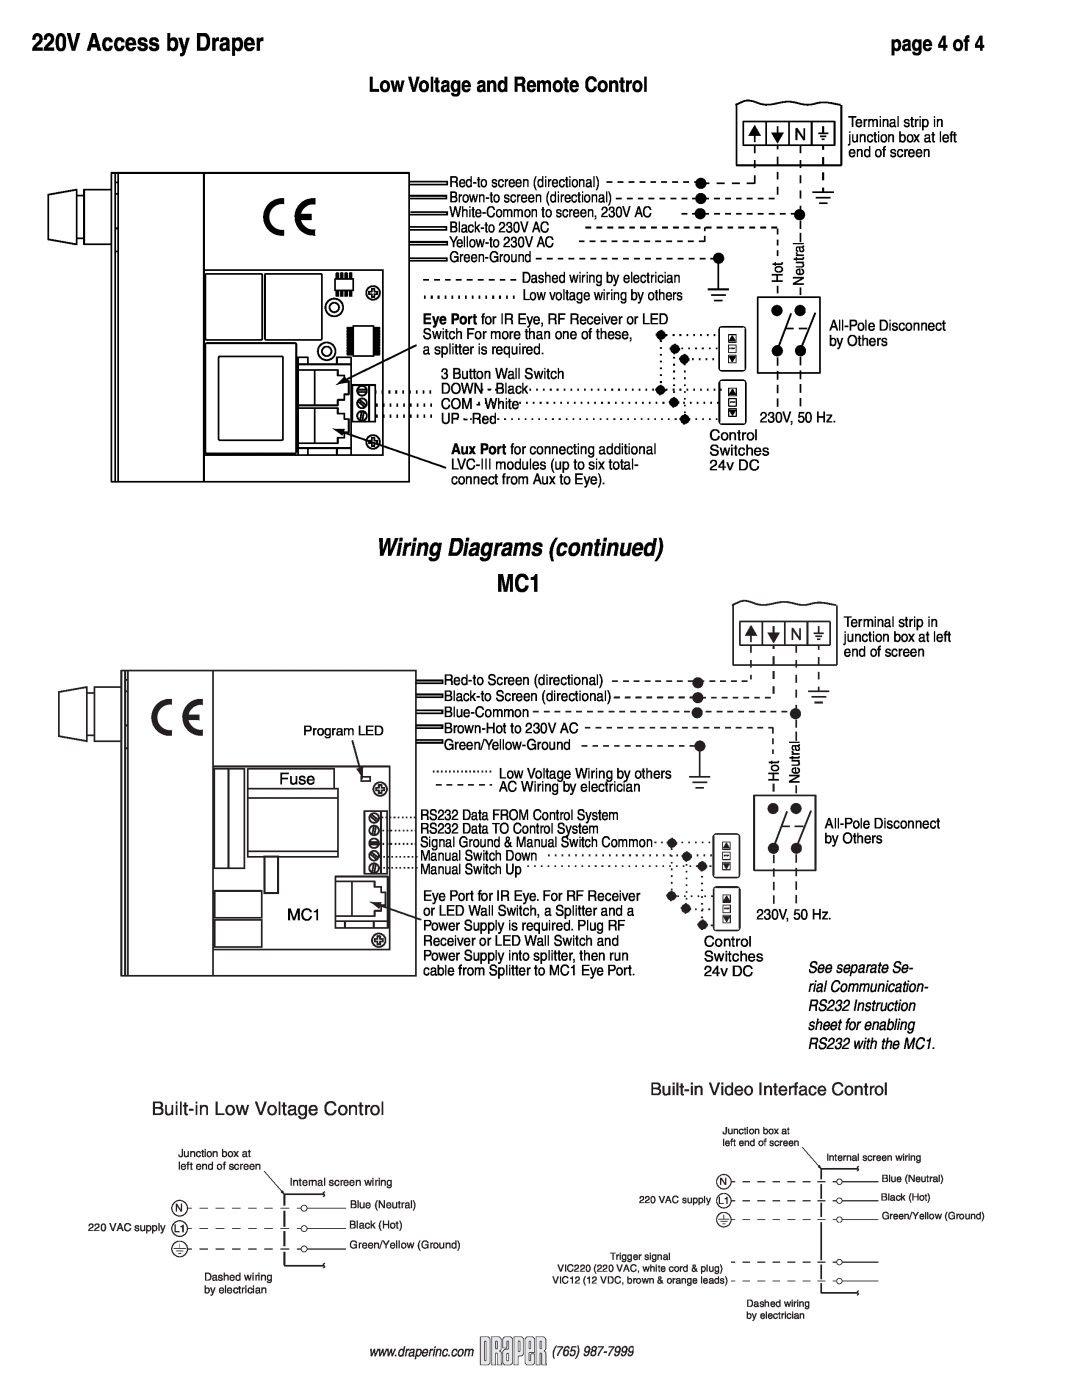 Draper 220V Access Electric Projection Screen Wiring Diagrams continued, page 4 of Low Voltage and Remote Control 